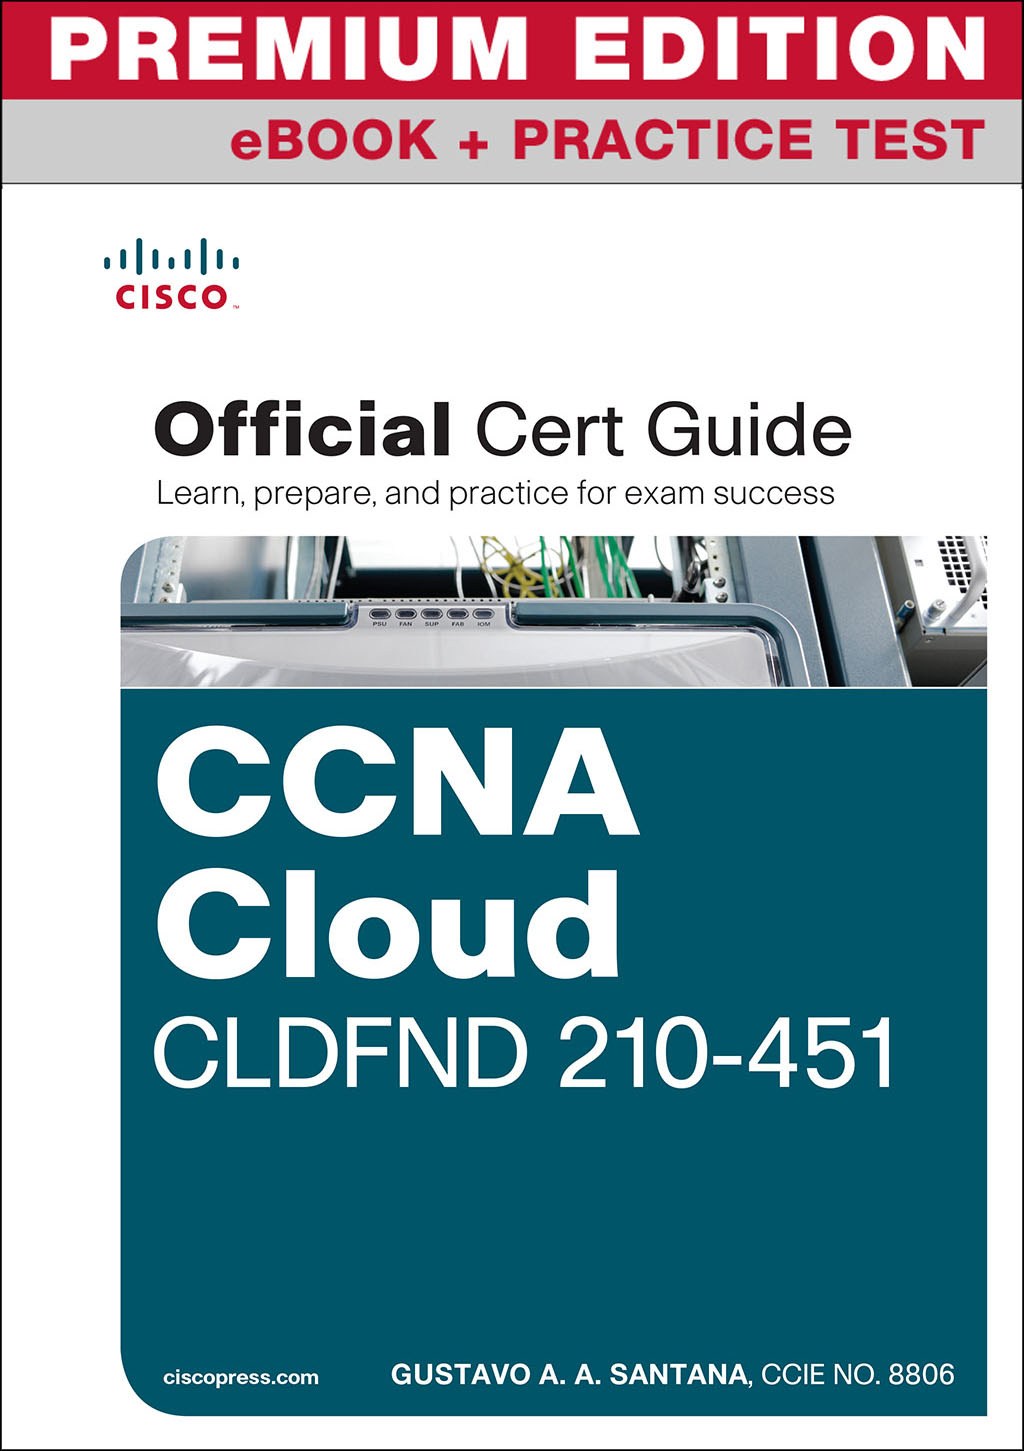 CCNA Cloud CLDFND 210-451 Official Cert Guide Premium Edition and Practice Tests